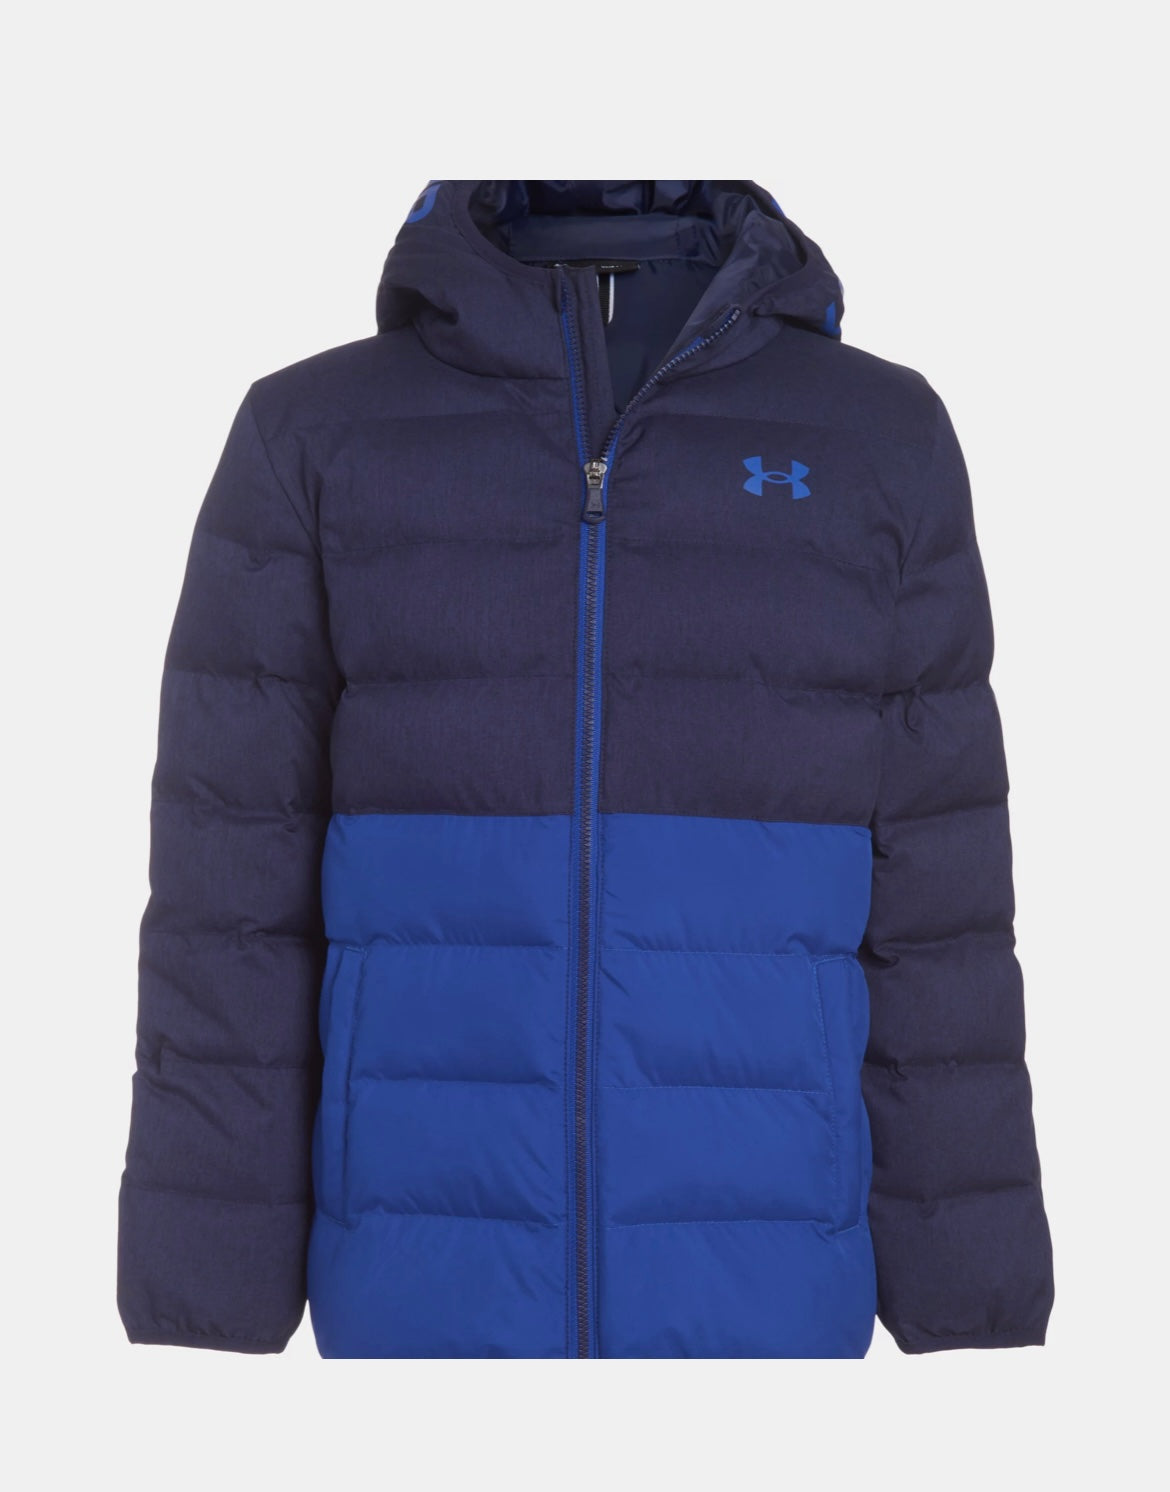 Under Armour Midnight Navy and Royal Blue Coat